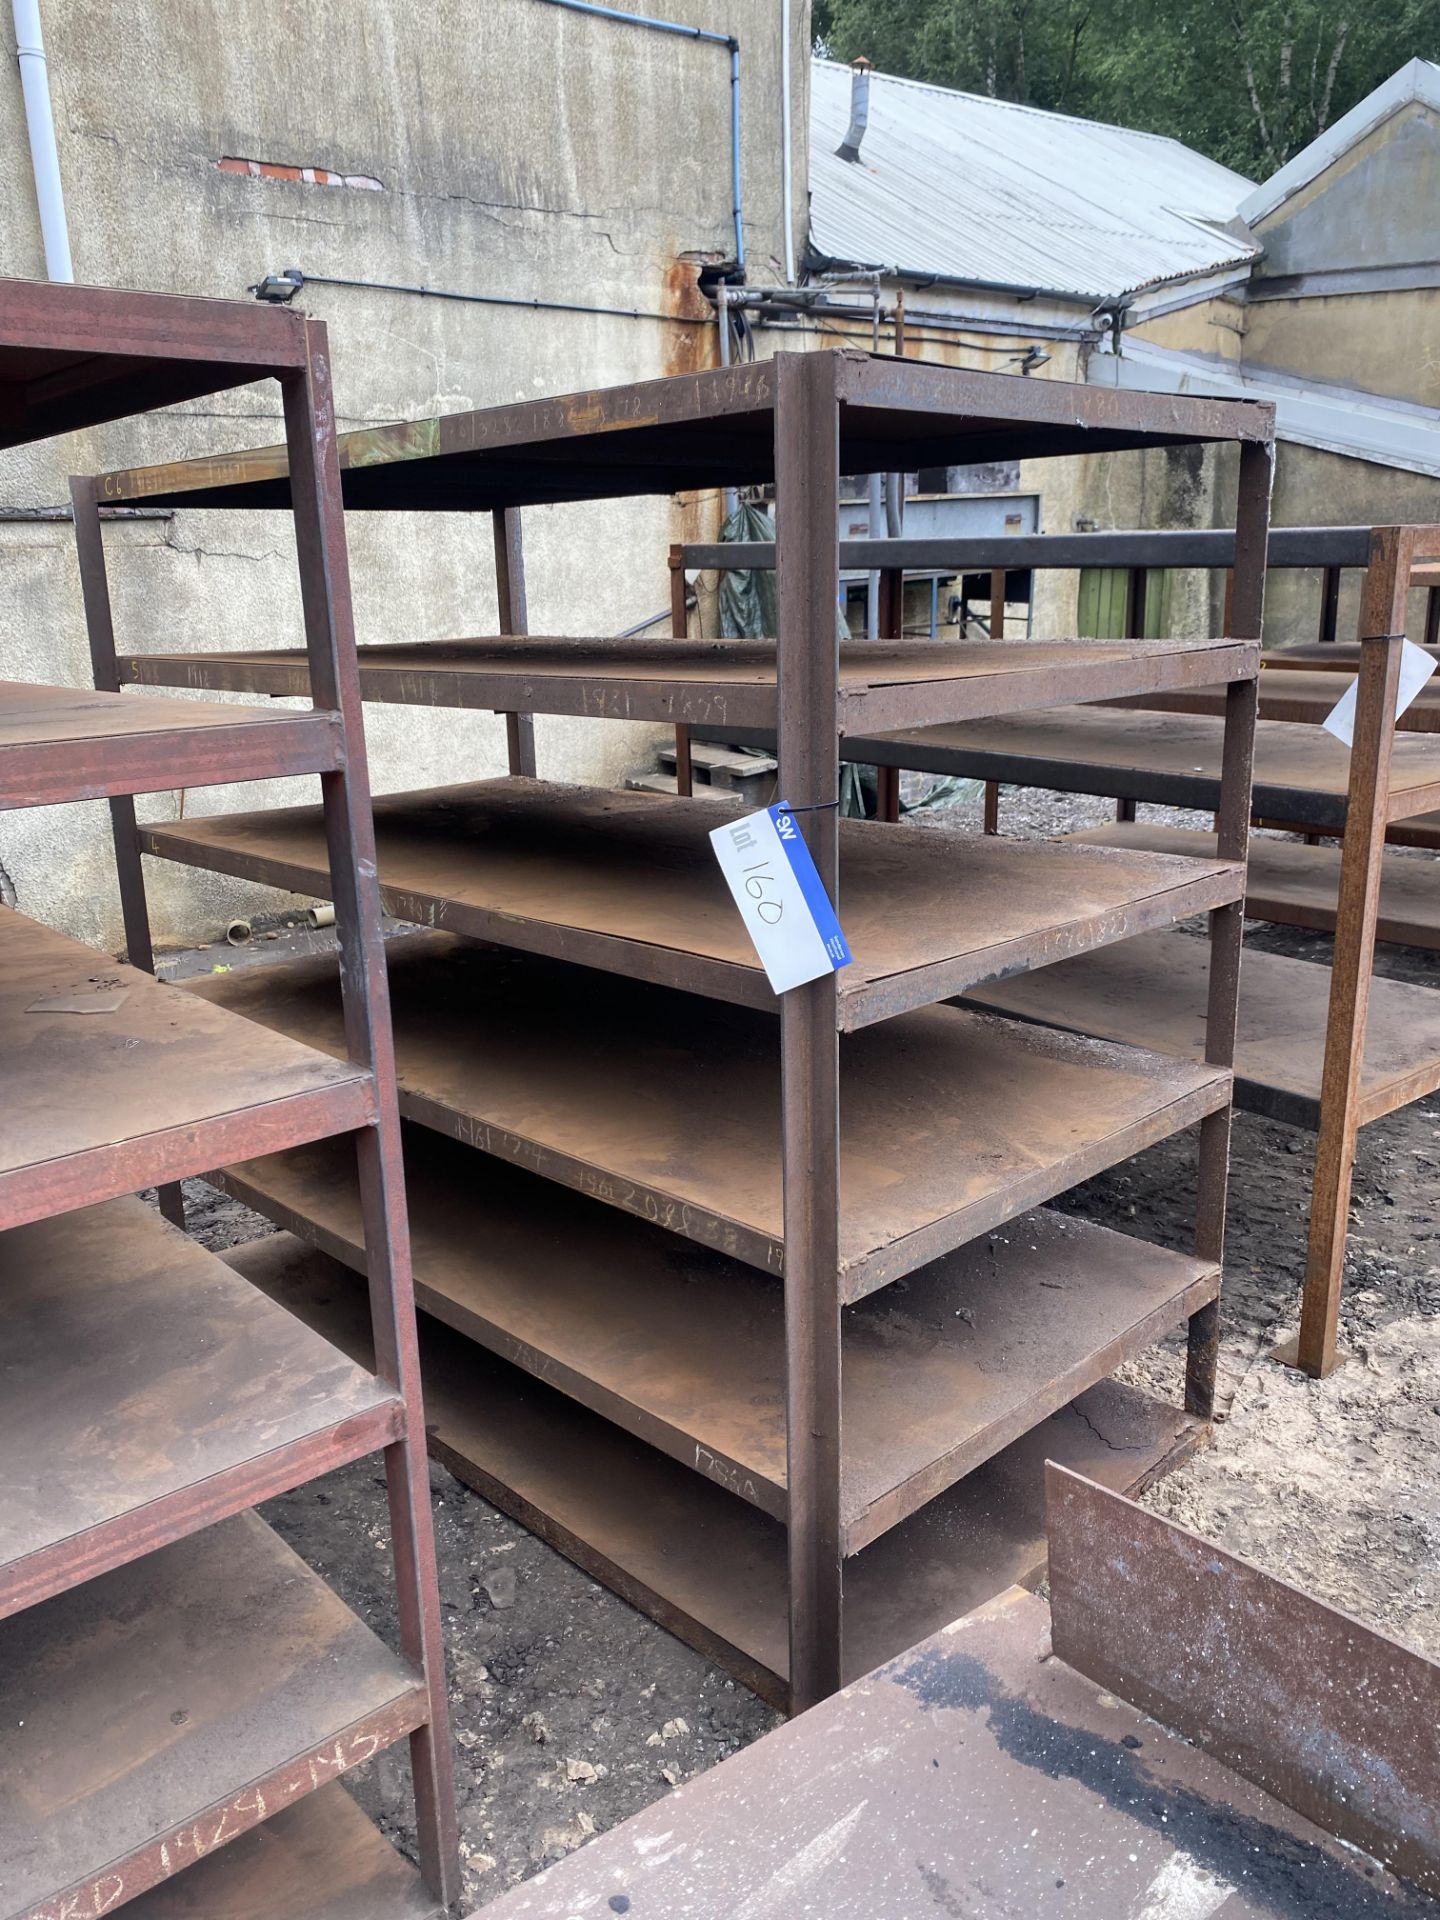 Single Bay Six Tier Steel Rack, approx. 2m wide (take out and loading charges £5 + VAT)Please read